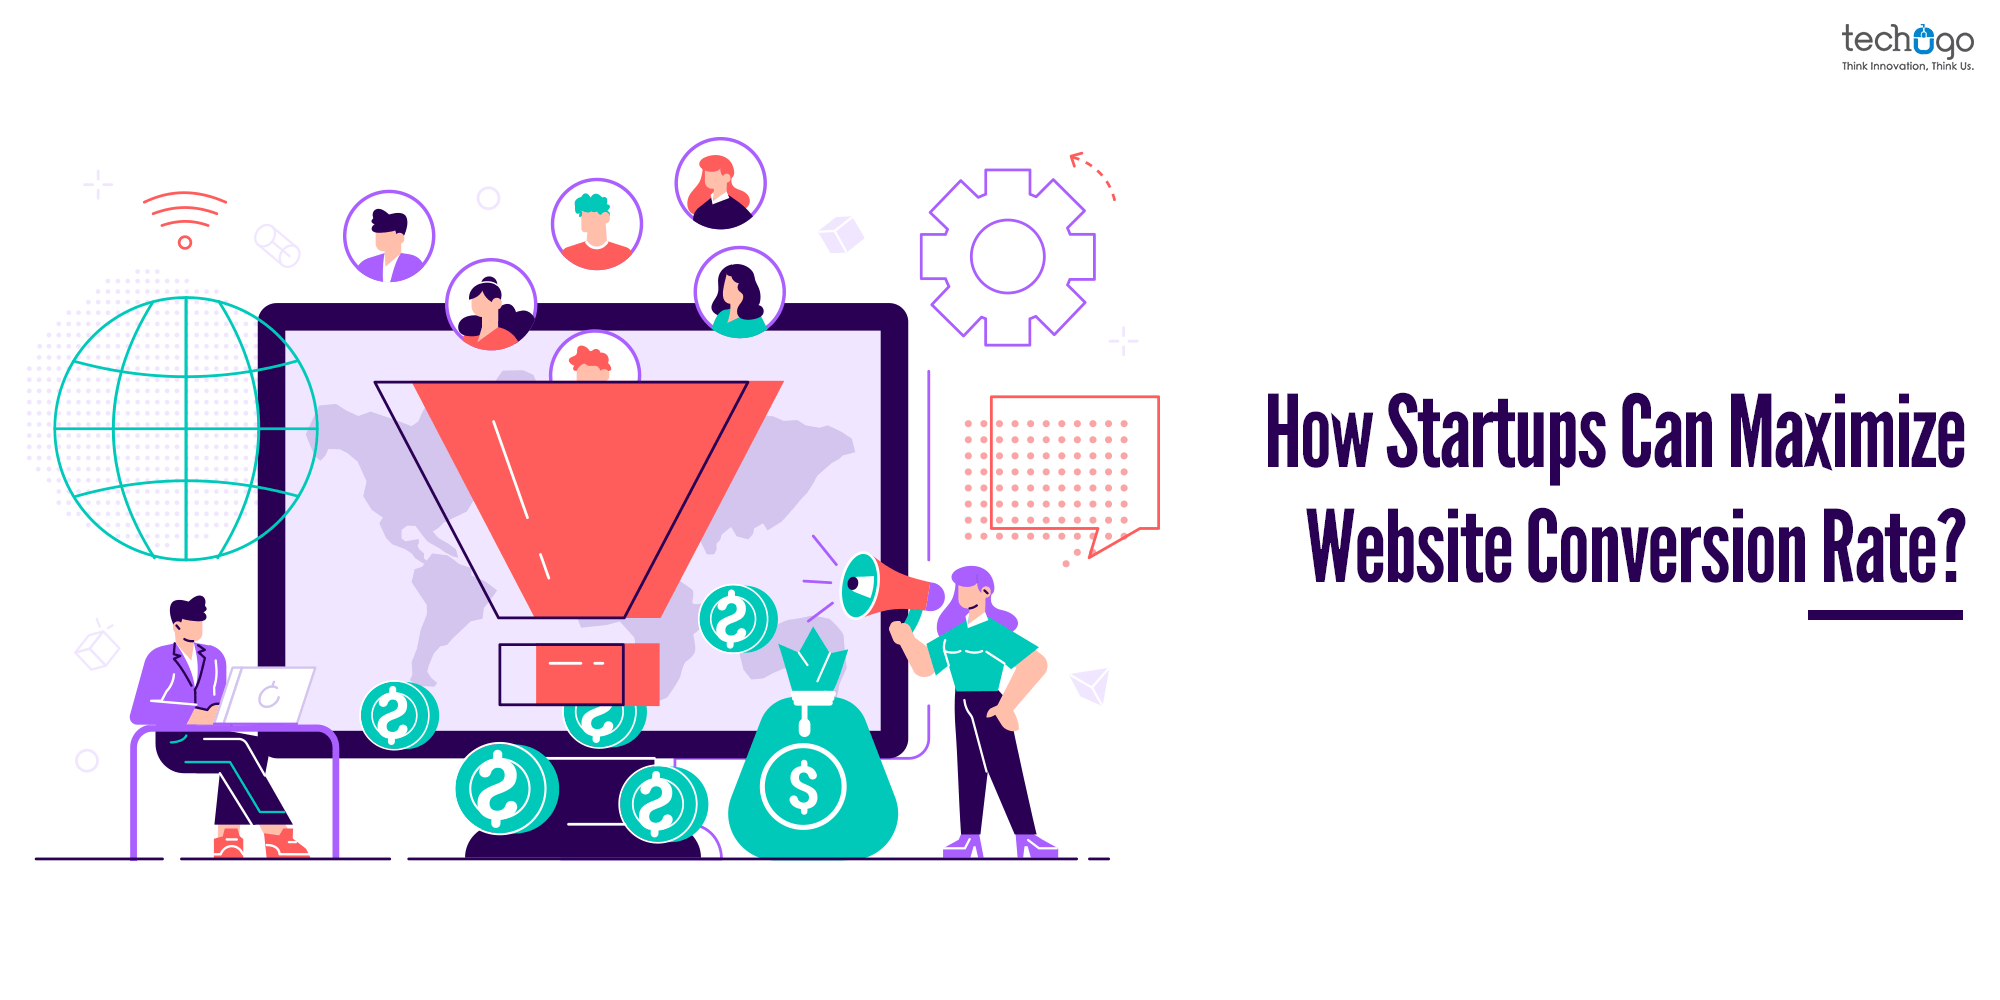 How Startups Can Maximize Website Conversion Rate?